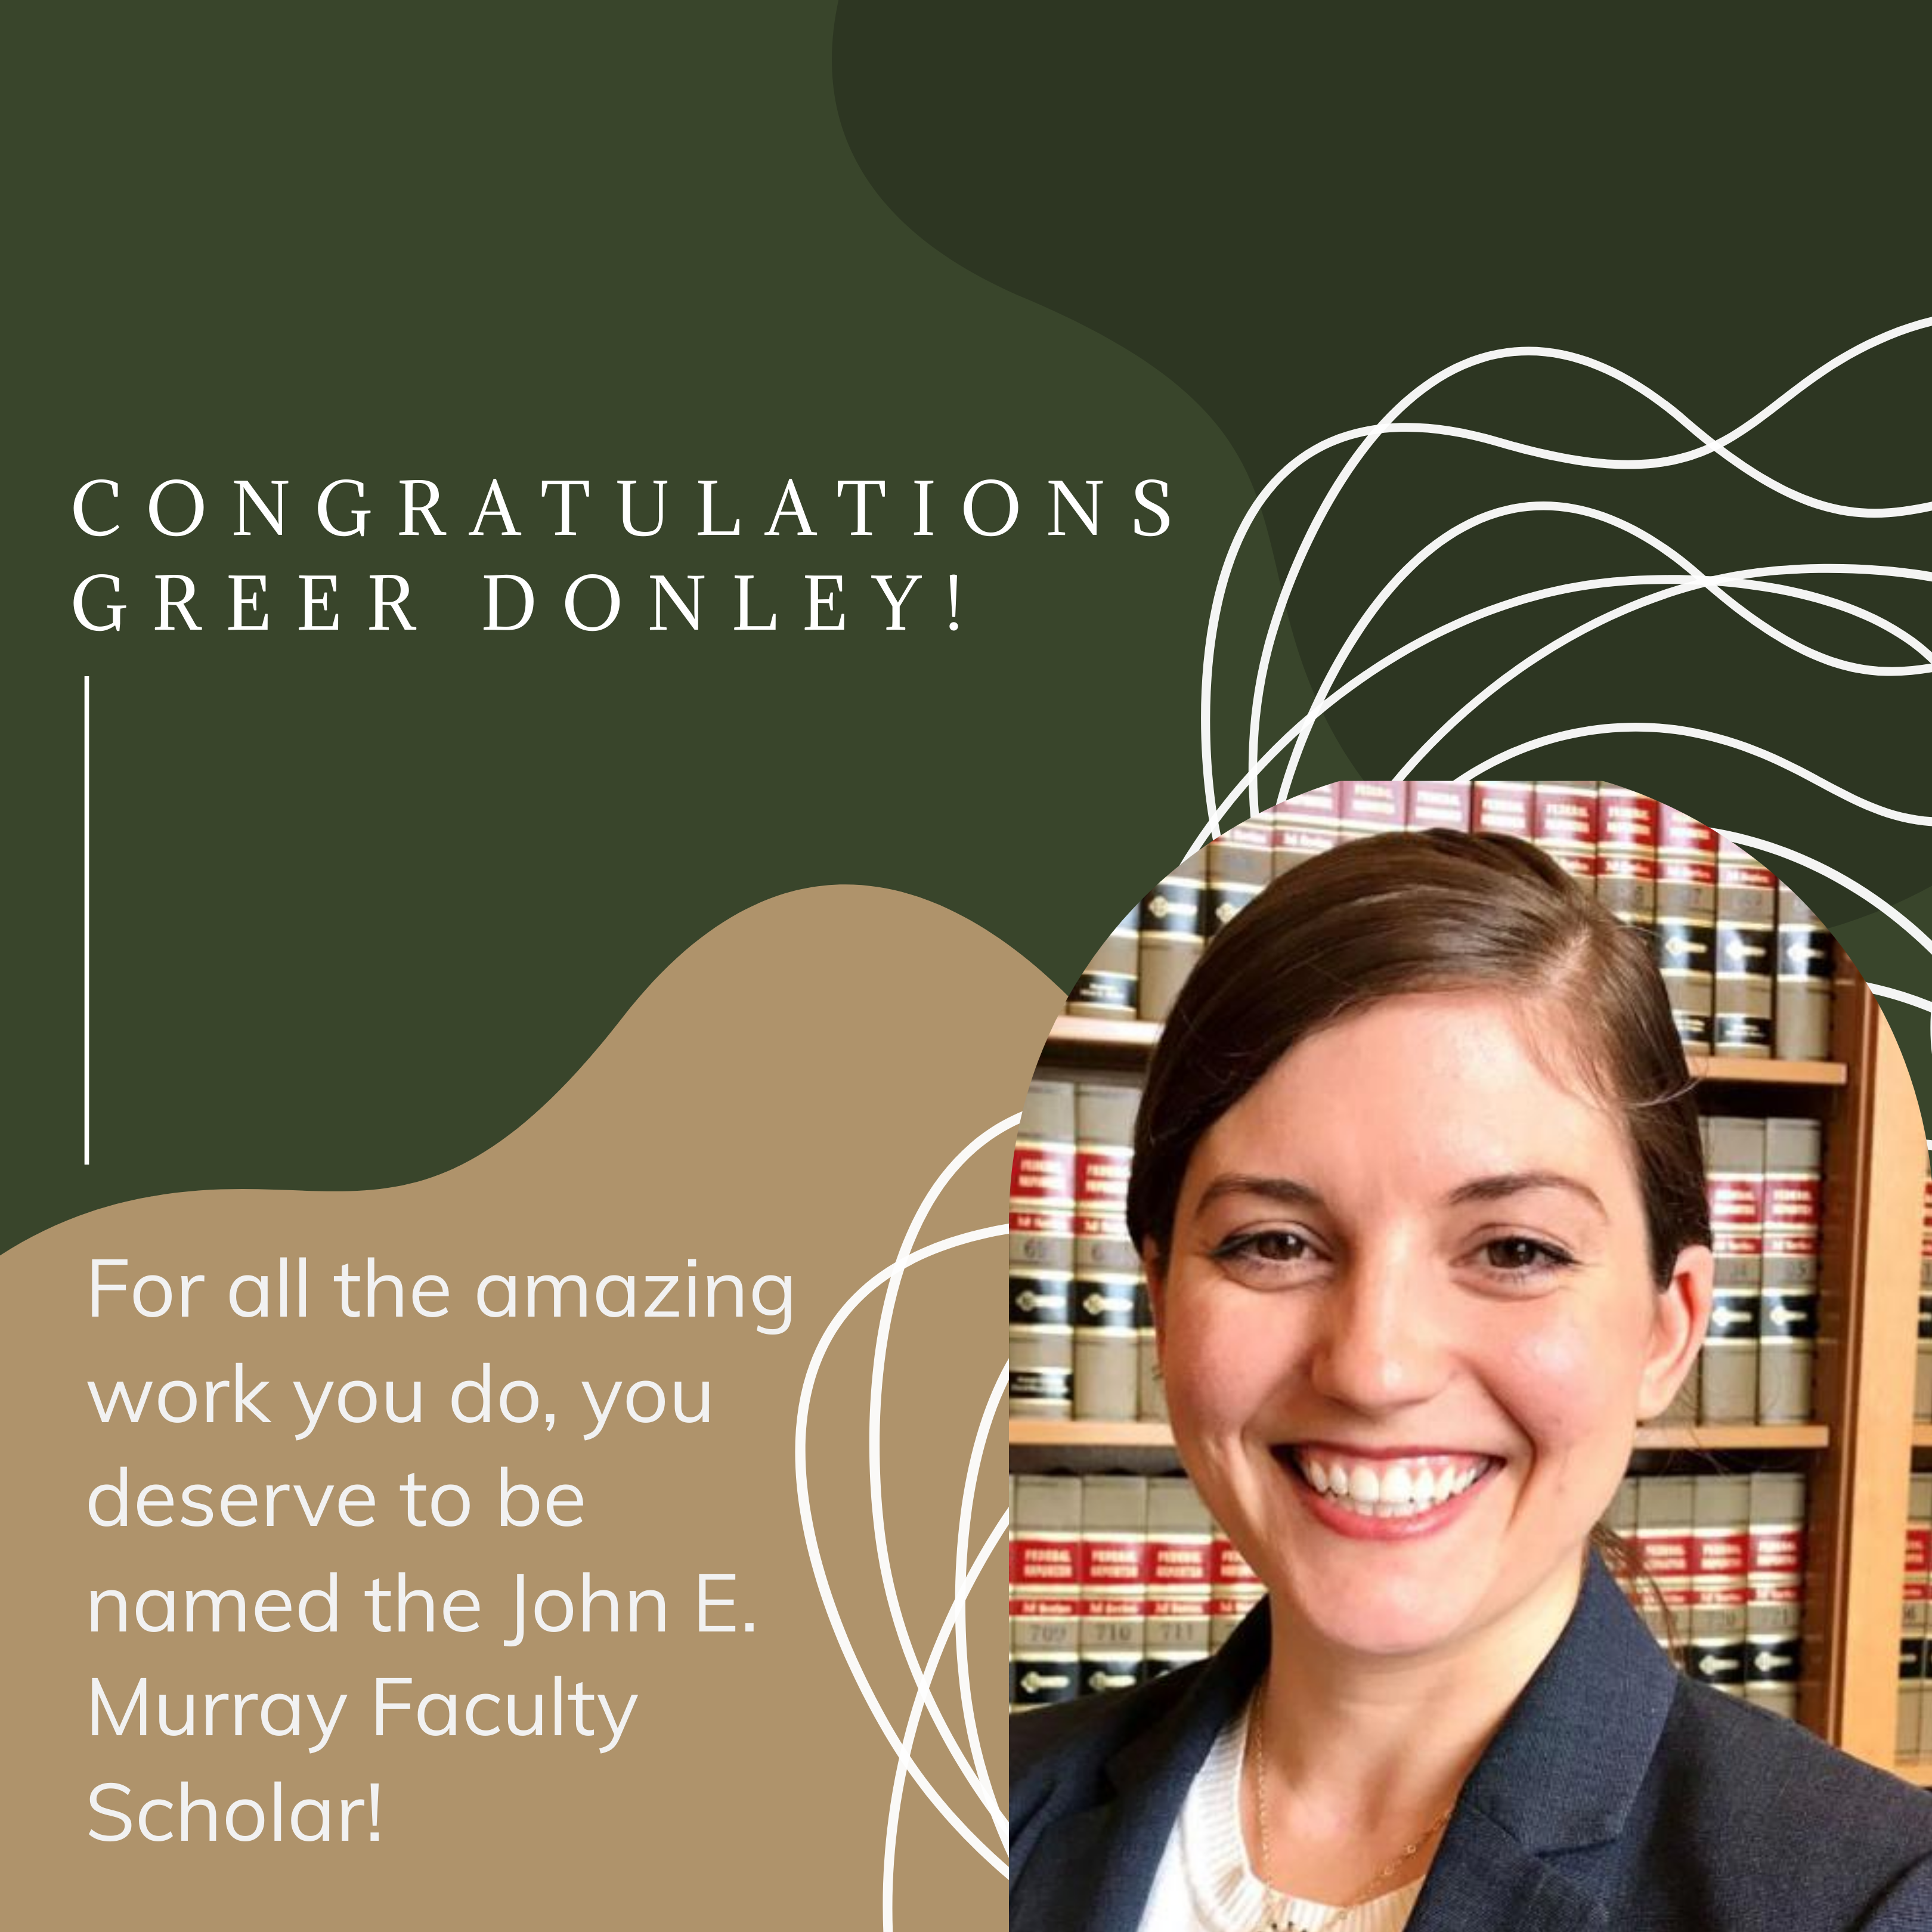 CONGRATULATIONS GREER DONLEY!  For all the amazing work you do, you deserve to be named the John E. Murray Faculty Scholar!